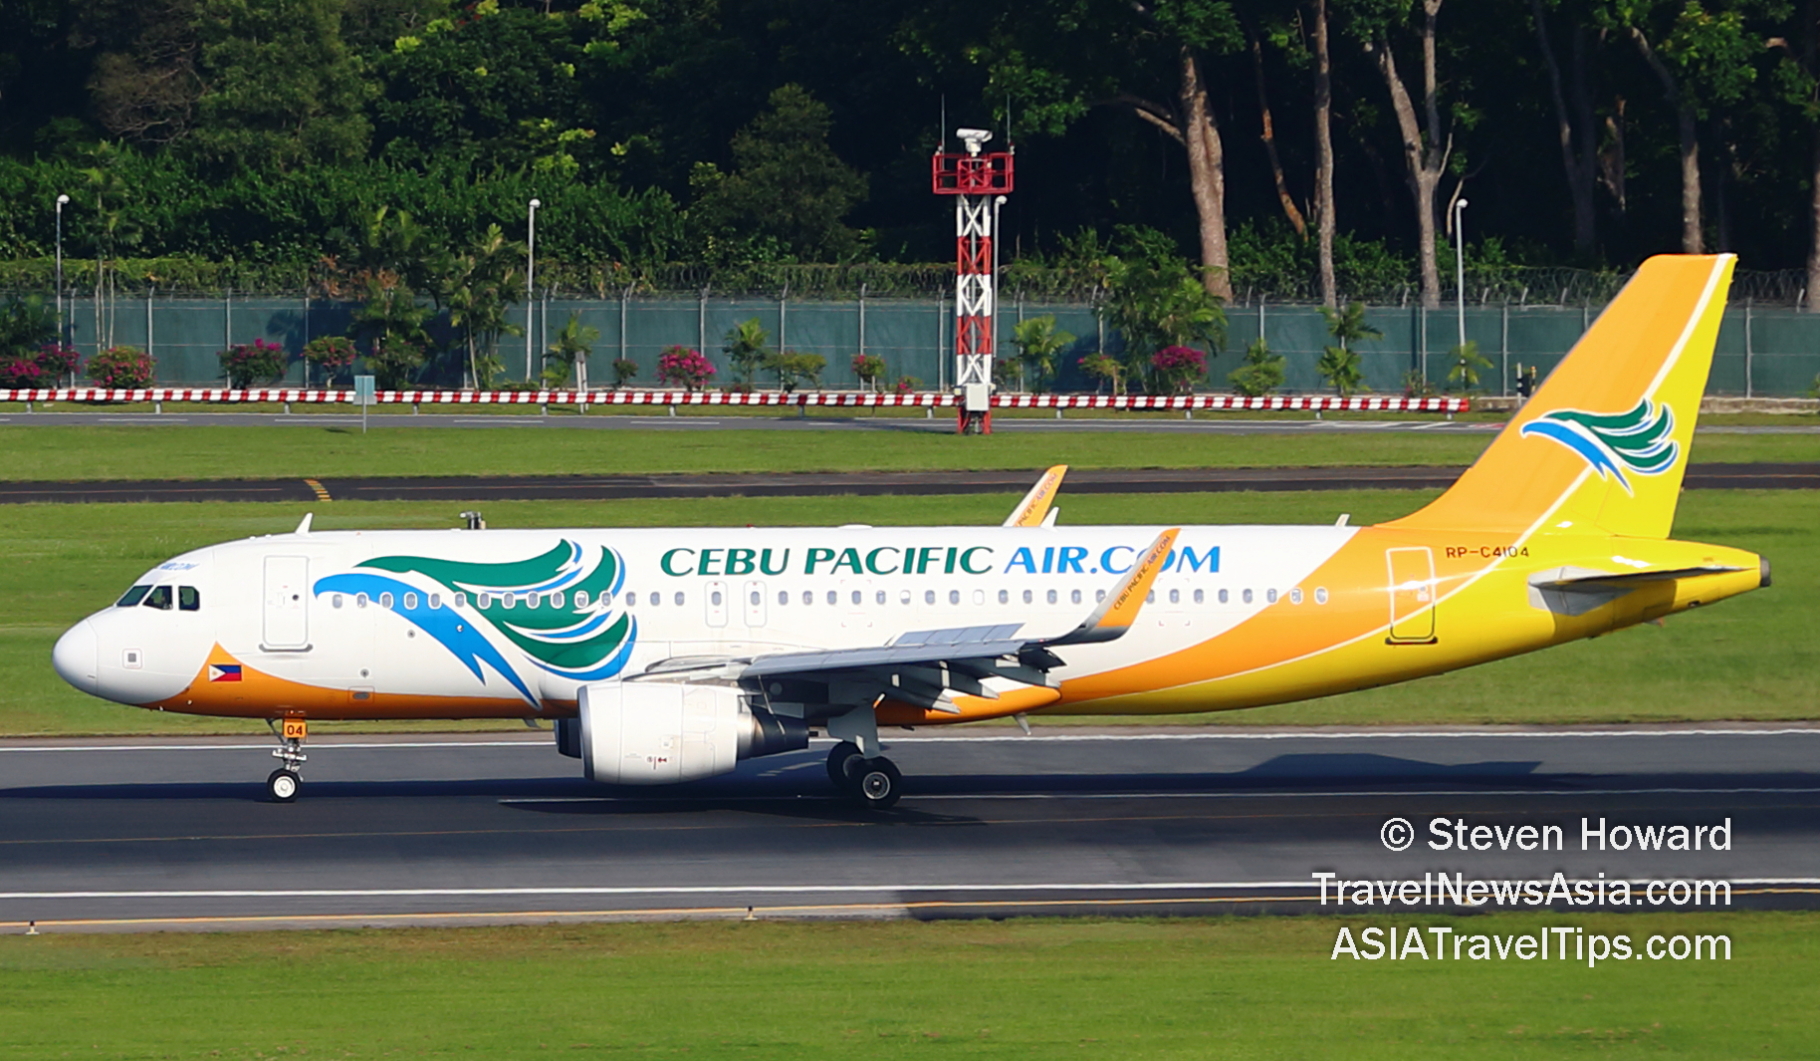 Cebu Pacific A320. Picture by Steven Howard of TravelNewsAsia.com. Click to enlarge.